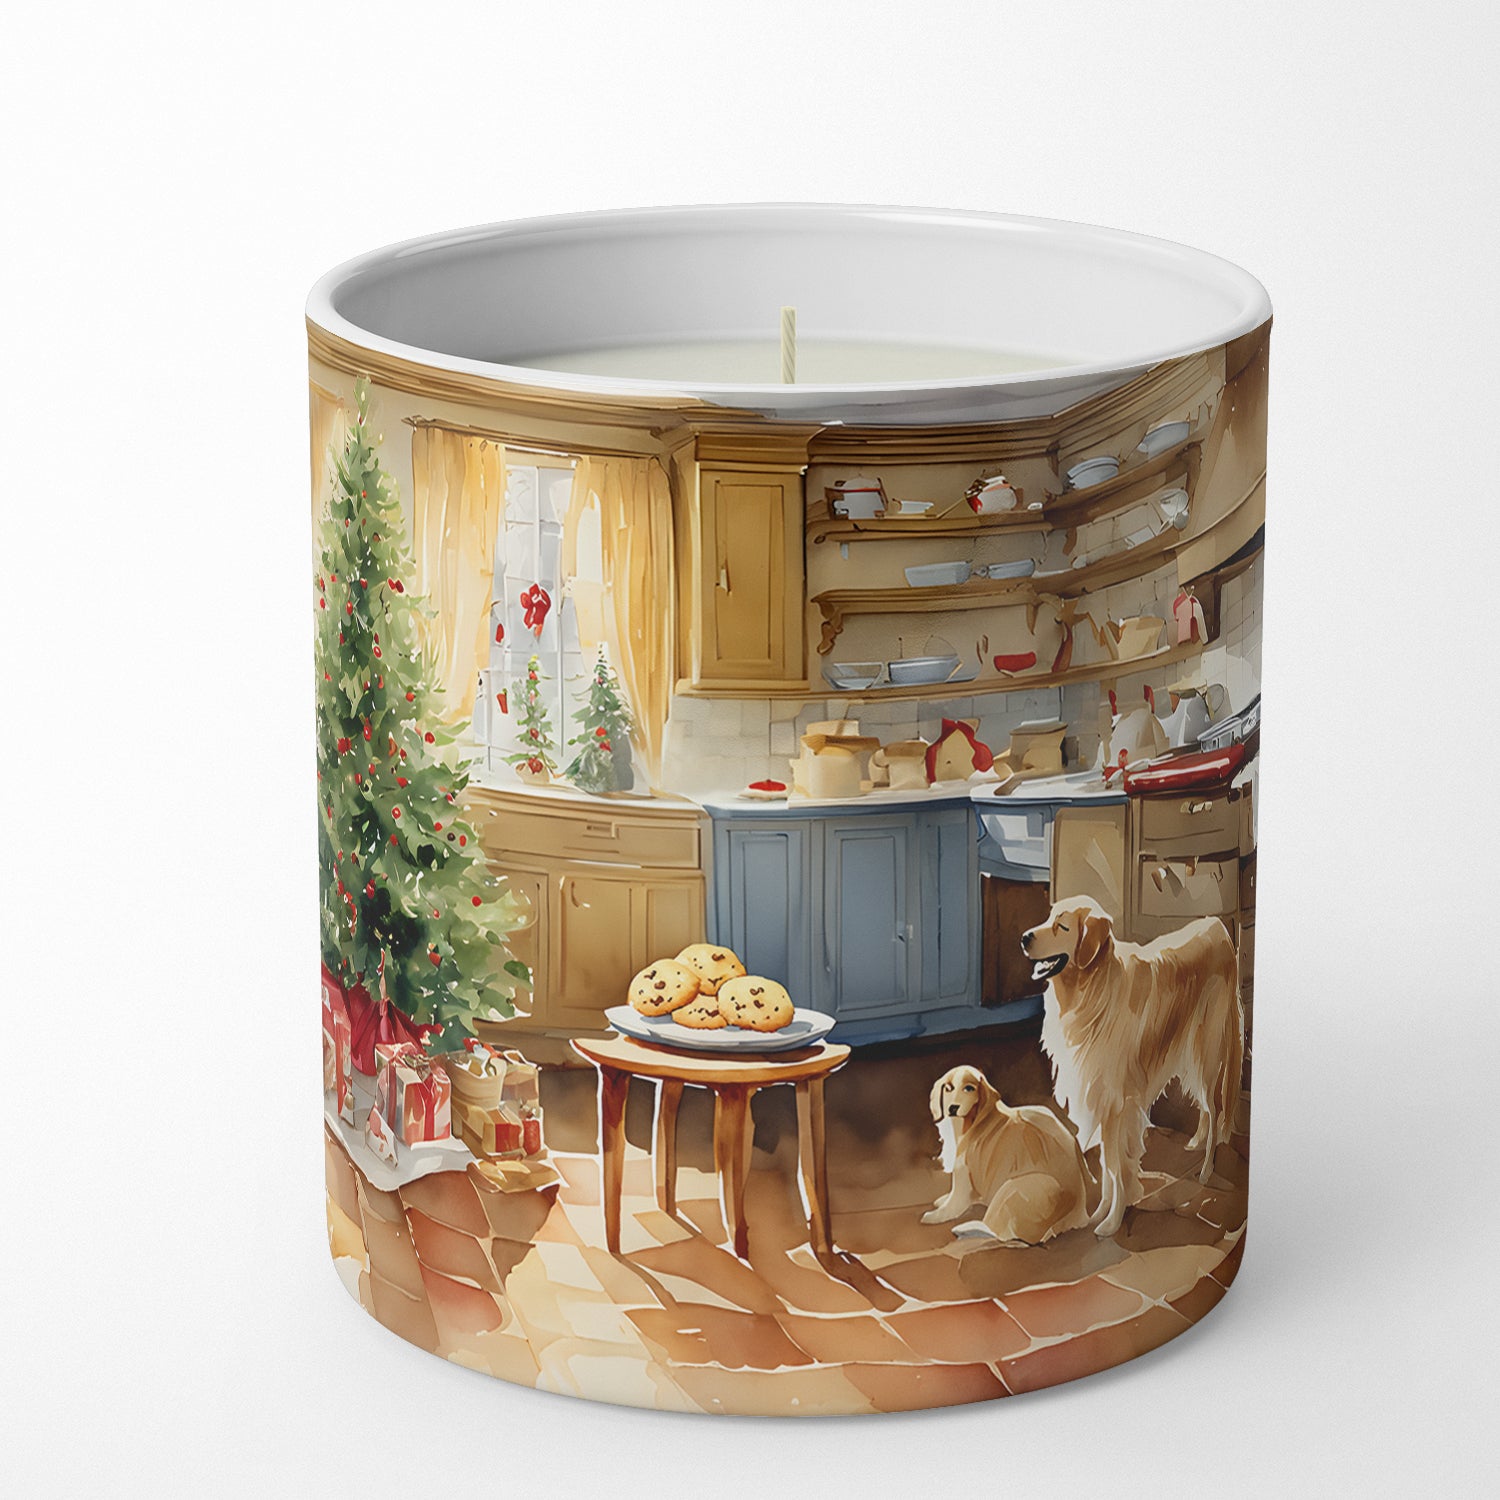 Golden Retriever Christmas Cookies Decorative Soy Candle